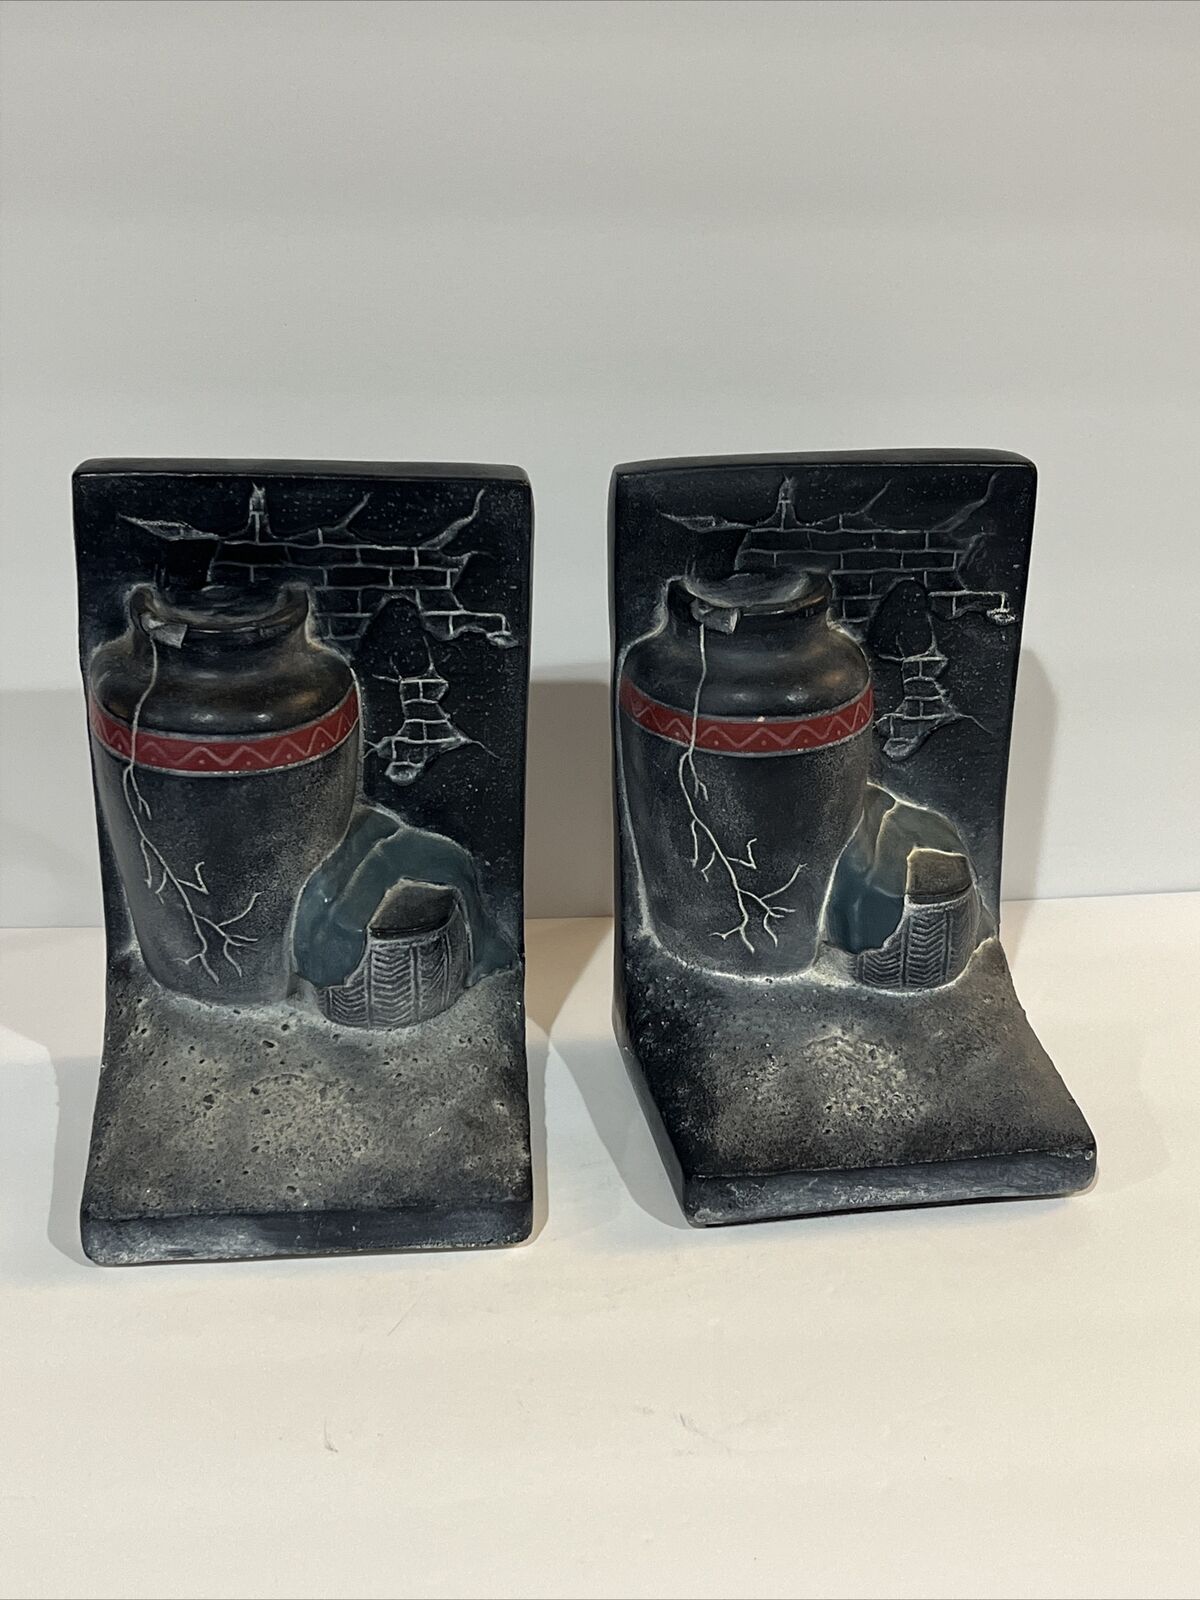 RARE Vintage South Western Pottery Vase Bookends By Ornamental Arts Inc Texas